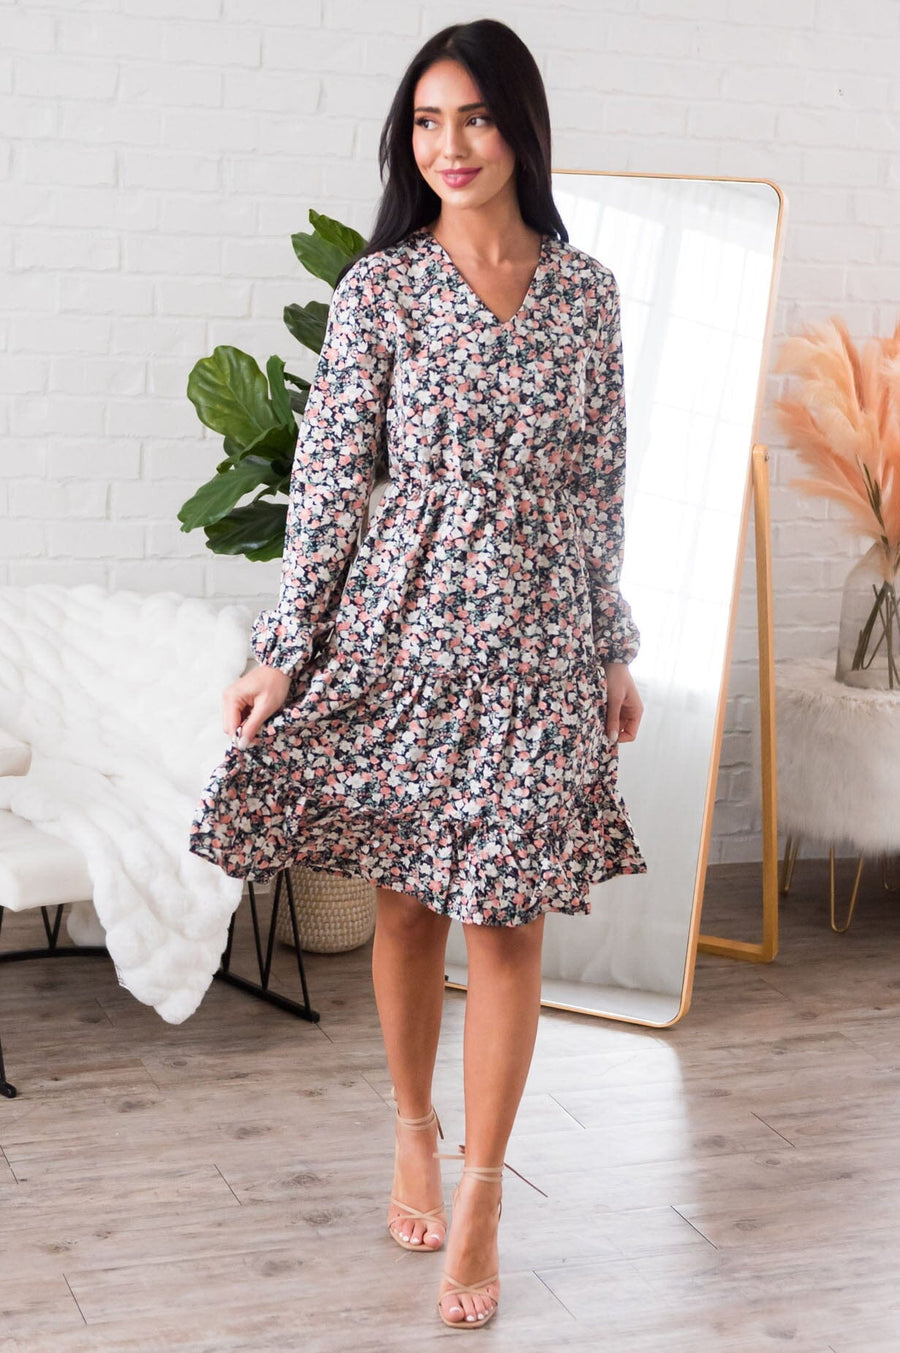 Modest Dresses for Women Page 27 - NeeSee's Dresses